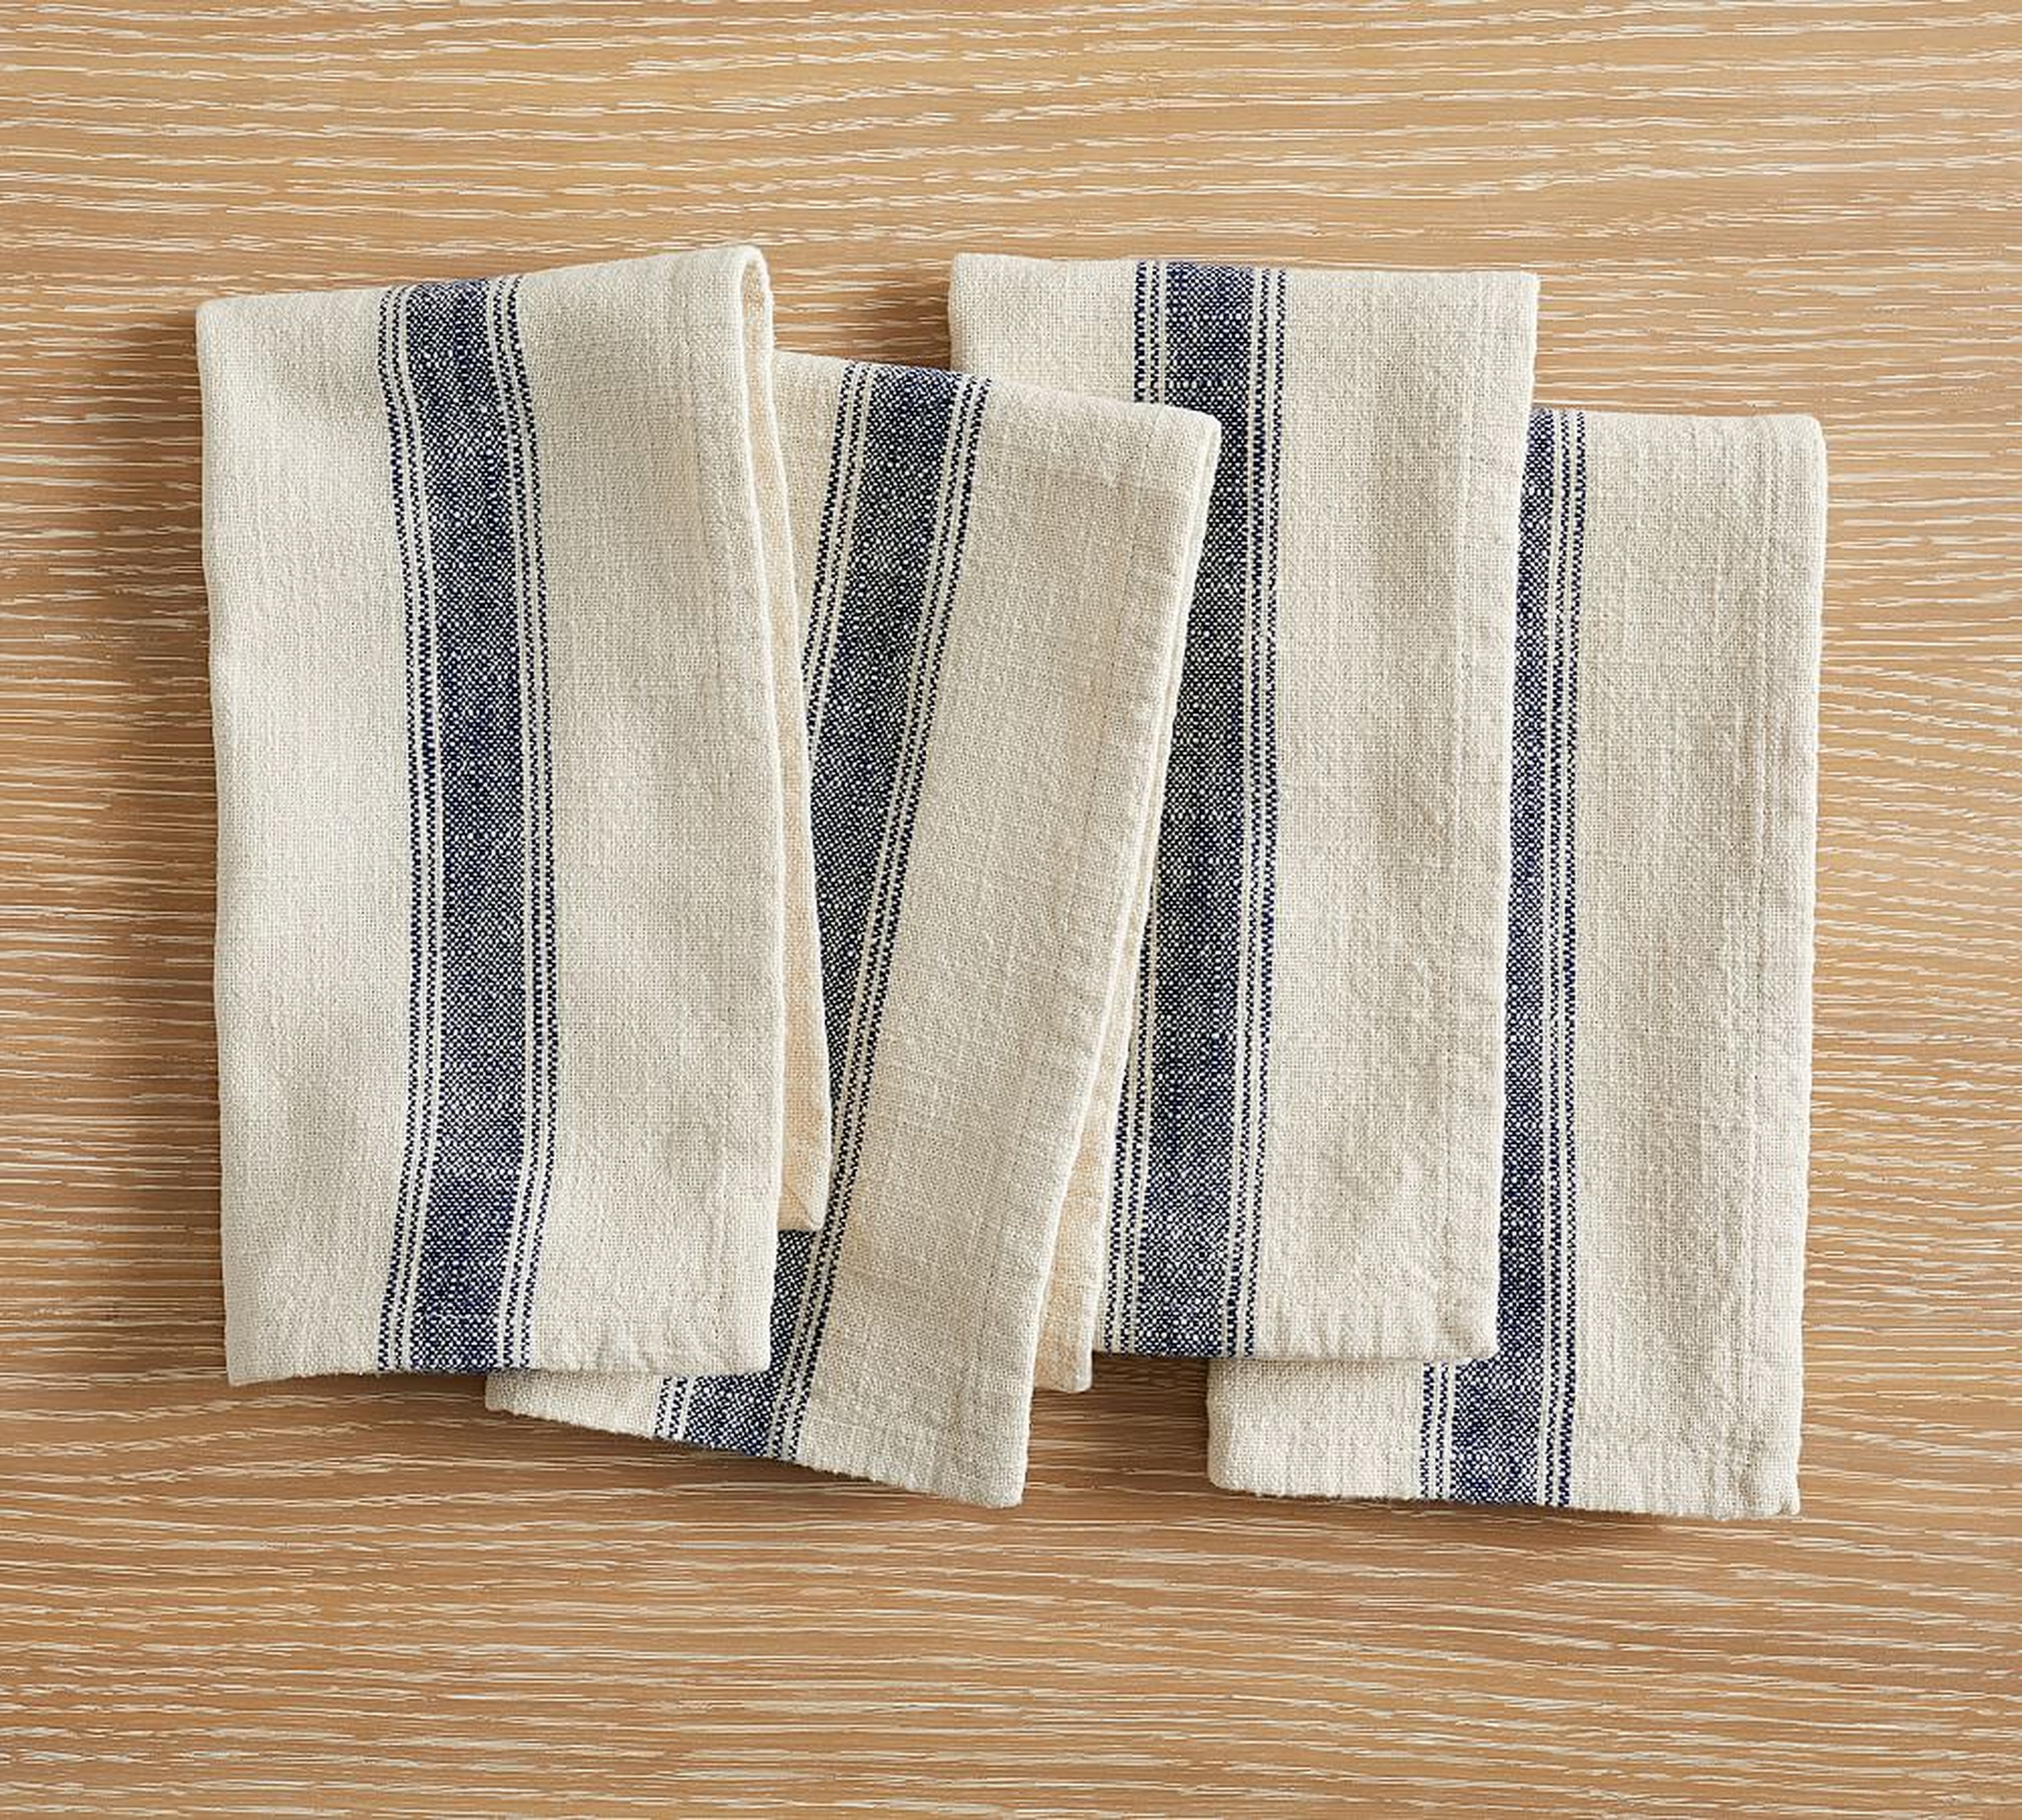 French Striped Organic Cotton Napkins, Set of 4 - Blue/Flax - Pottery Barn